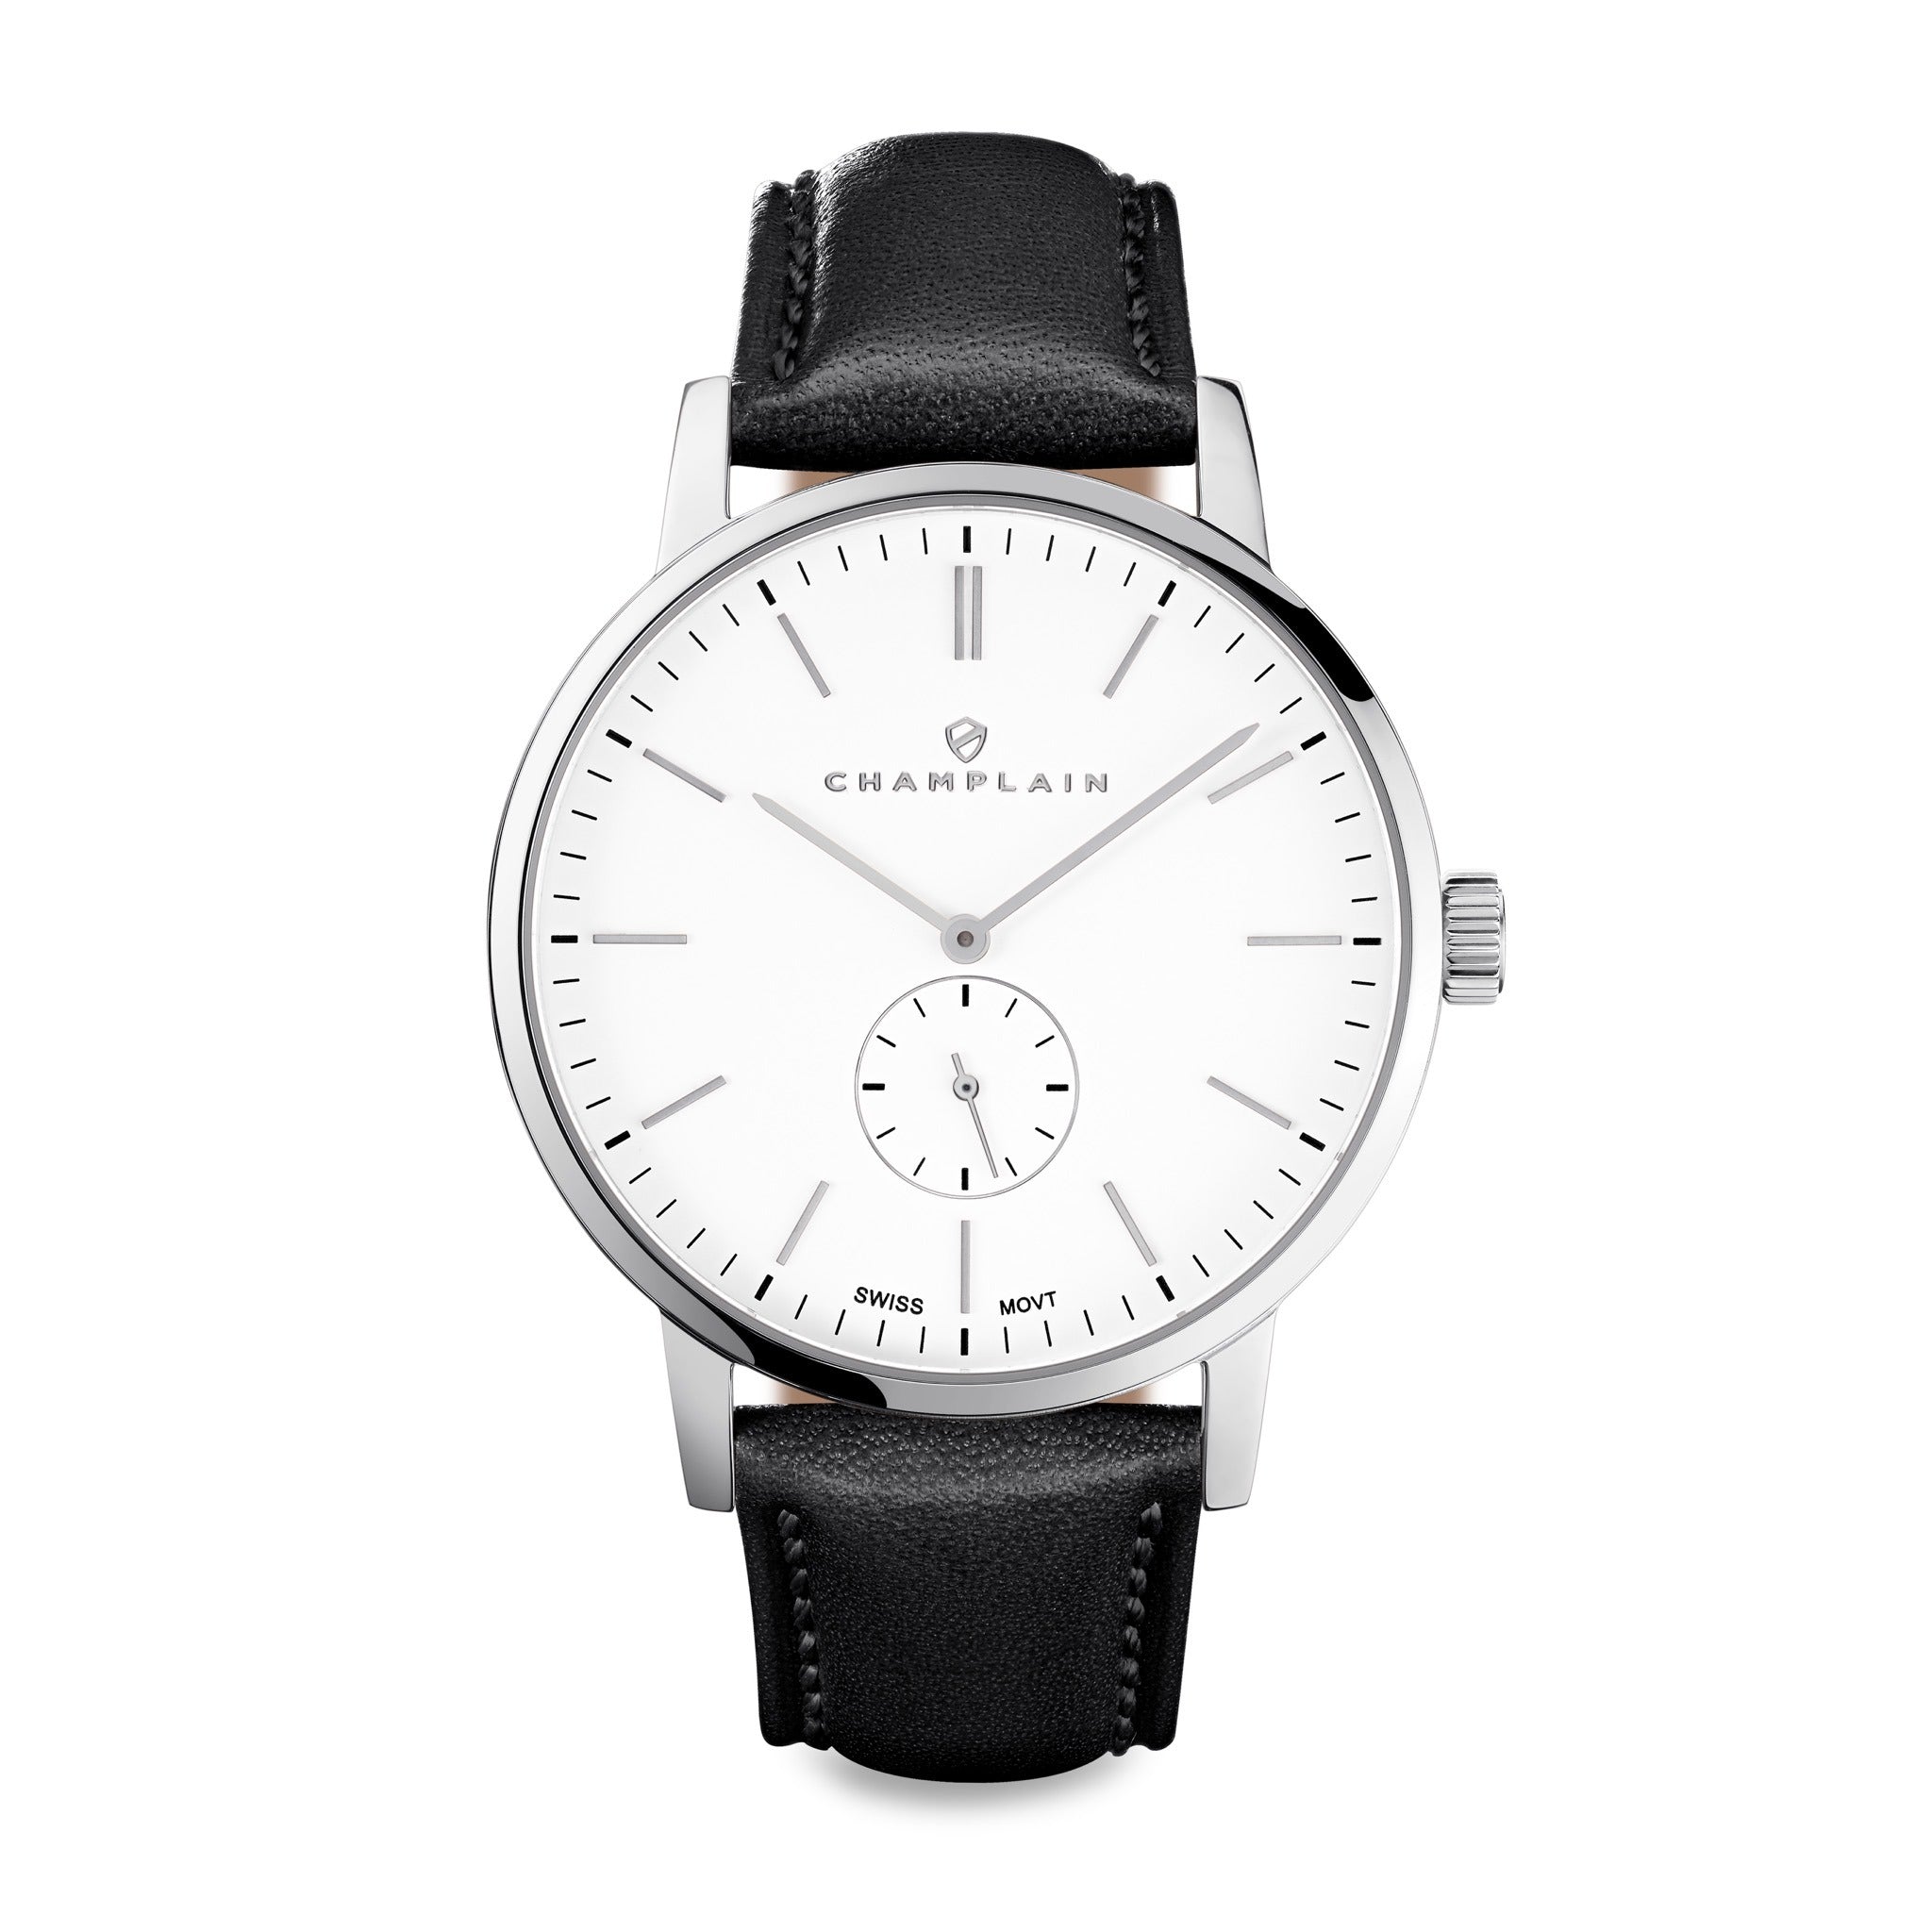 Silver/White - Black Governor Watch by Champlain